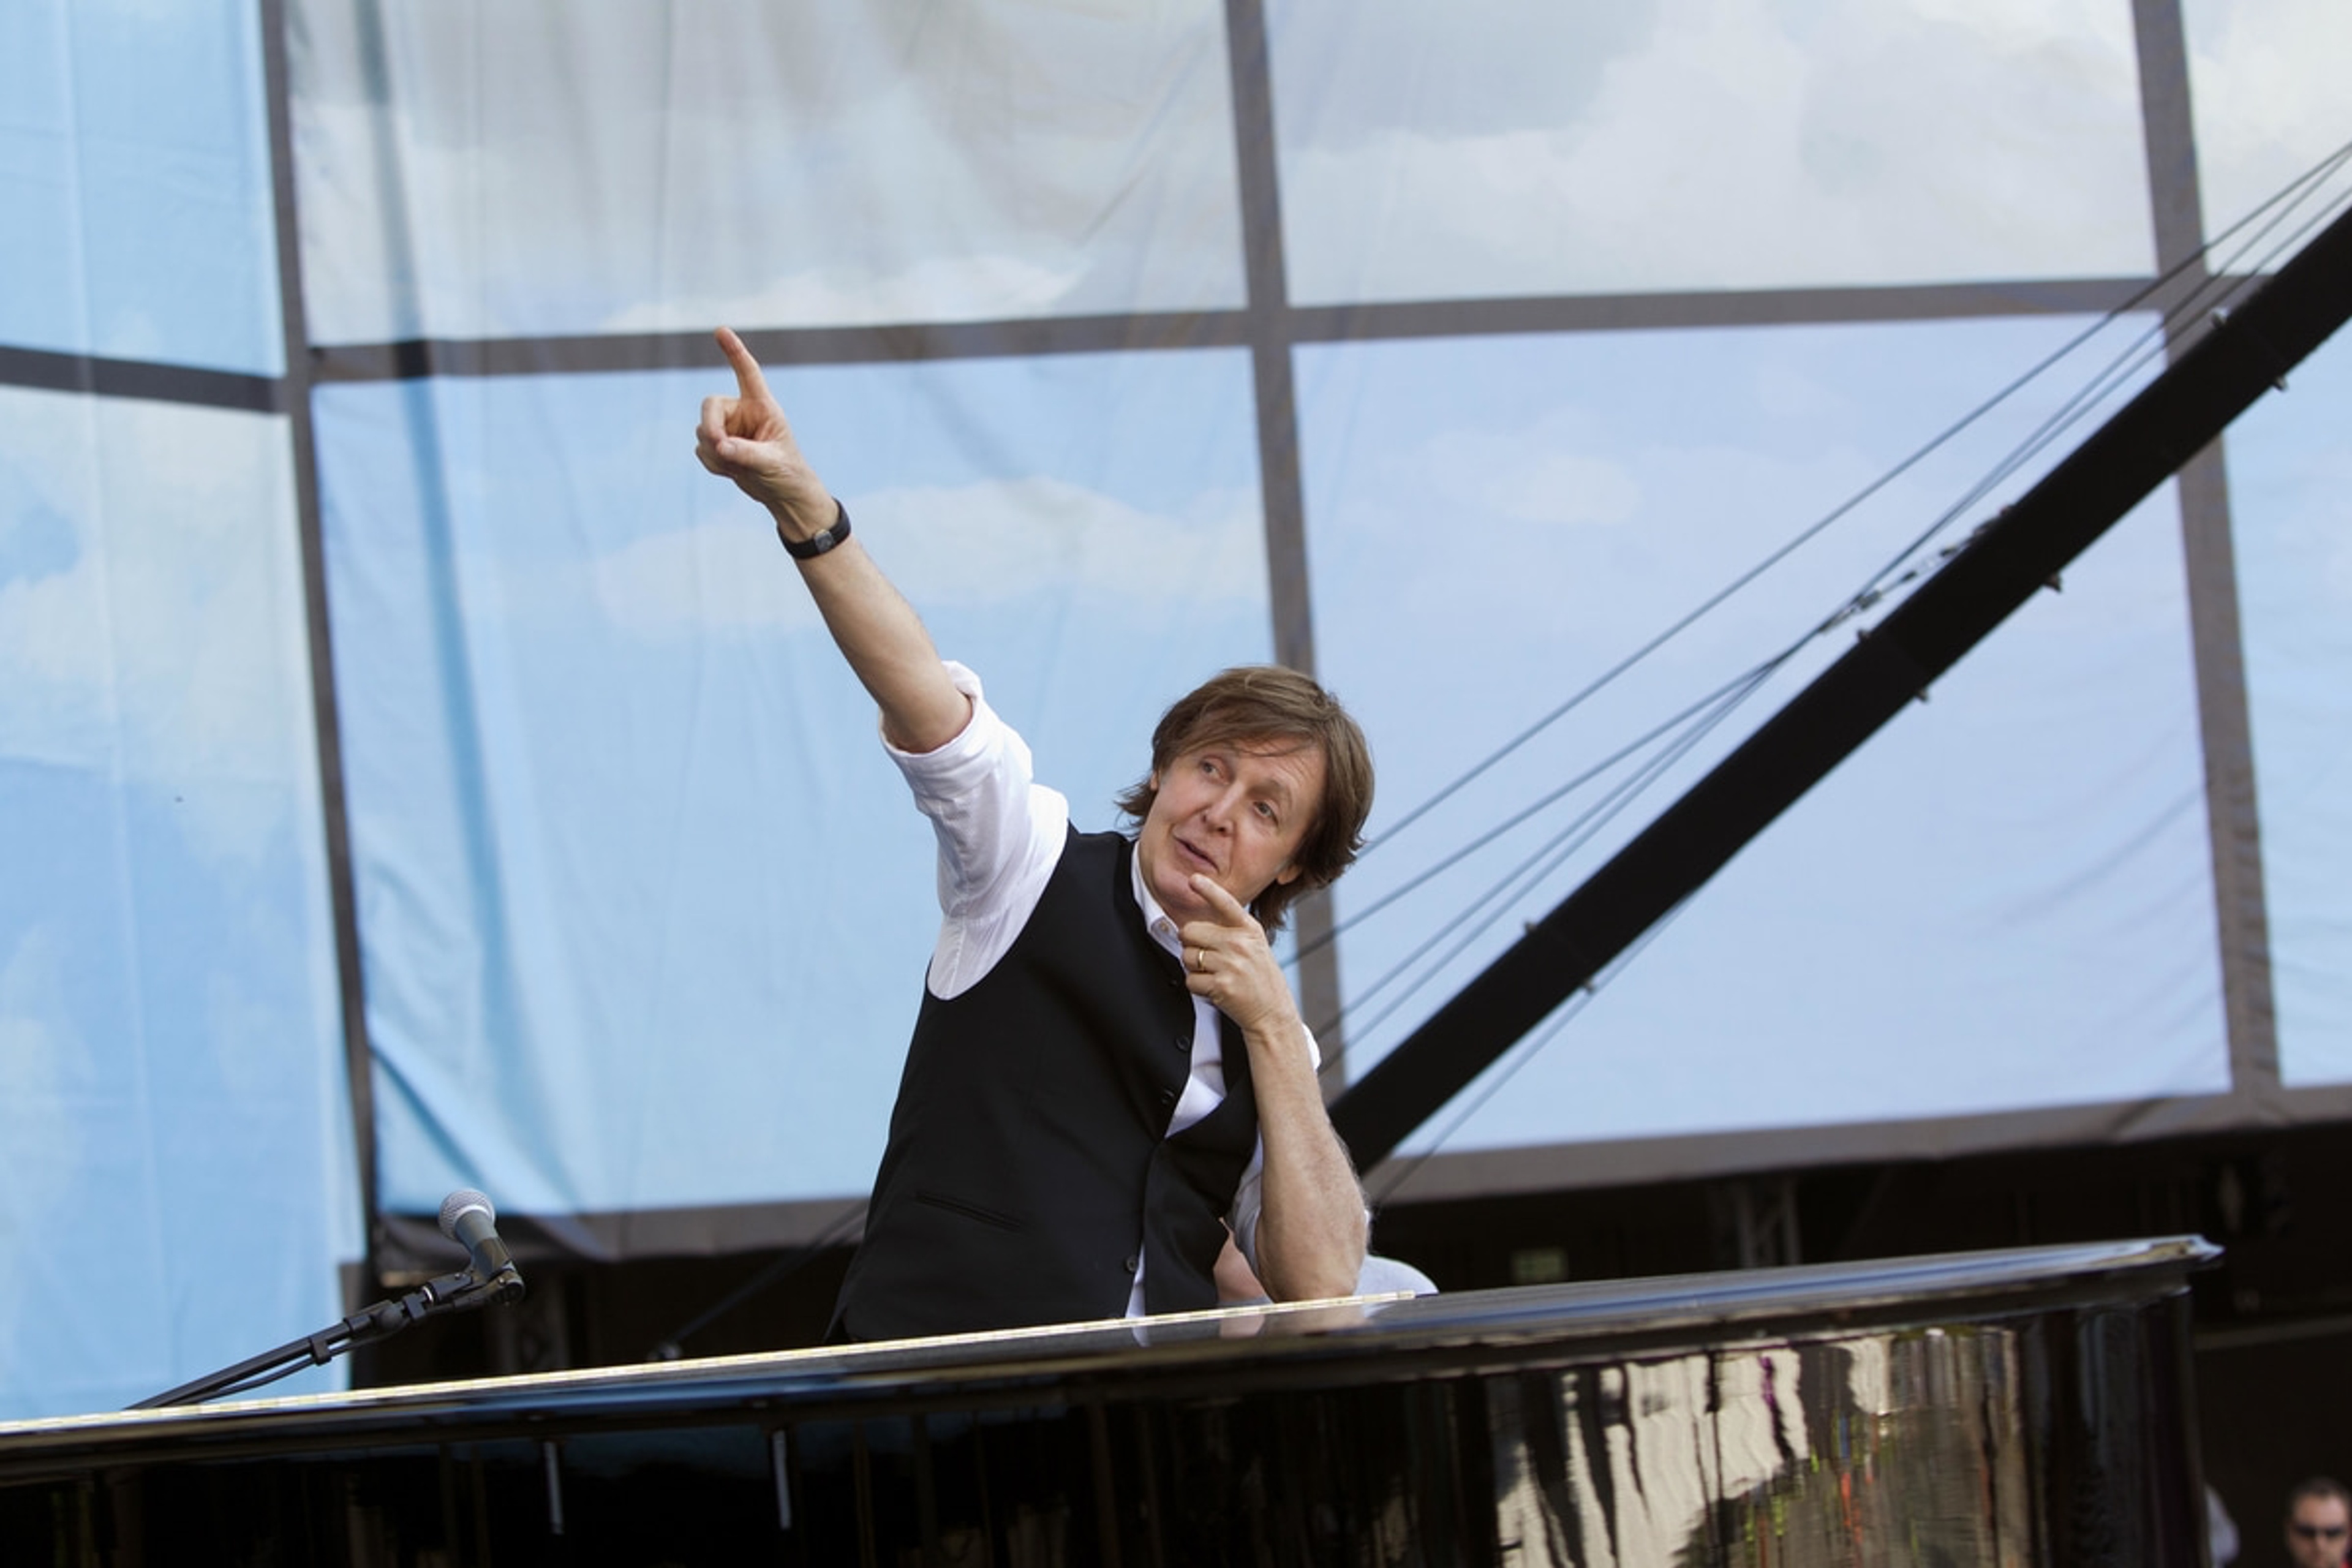 Paul on stage at the Olympic Opening Ceremony rehearsals, London, 24-Jul-12